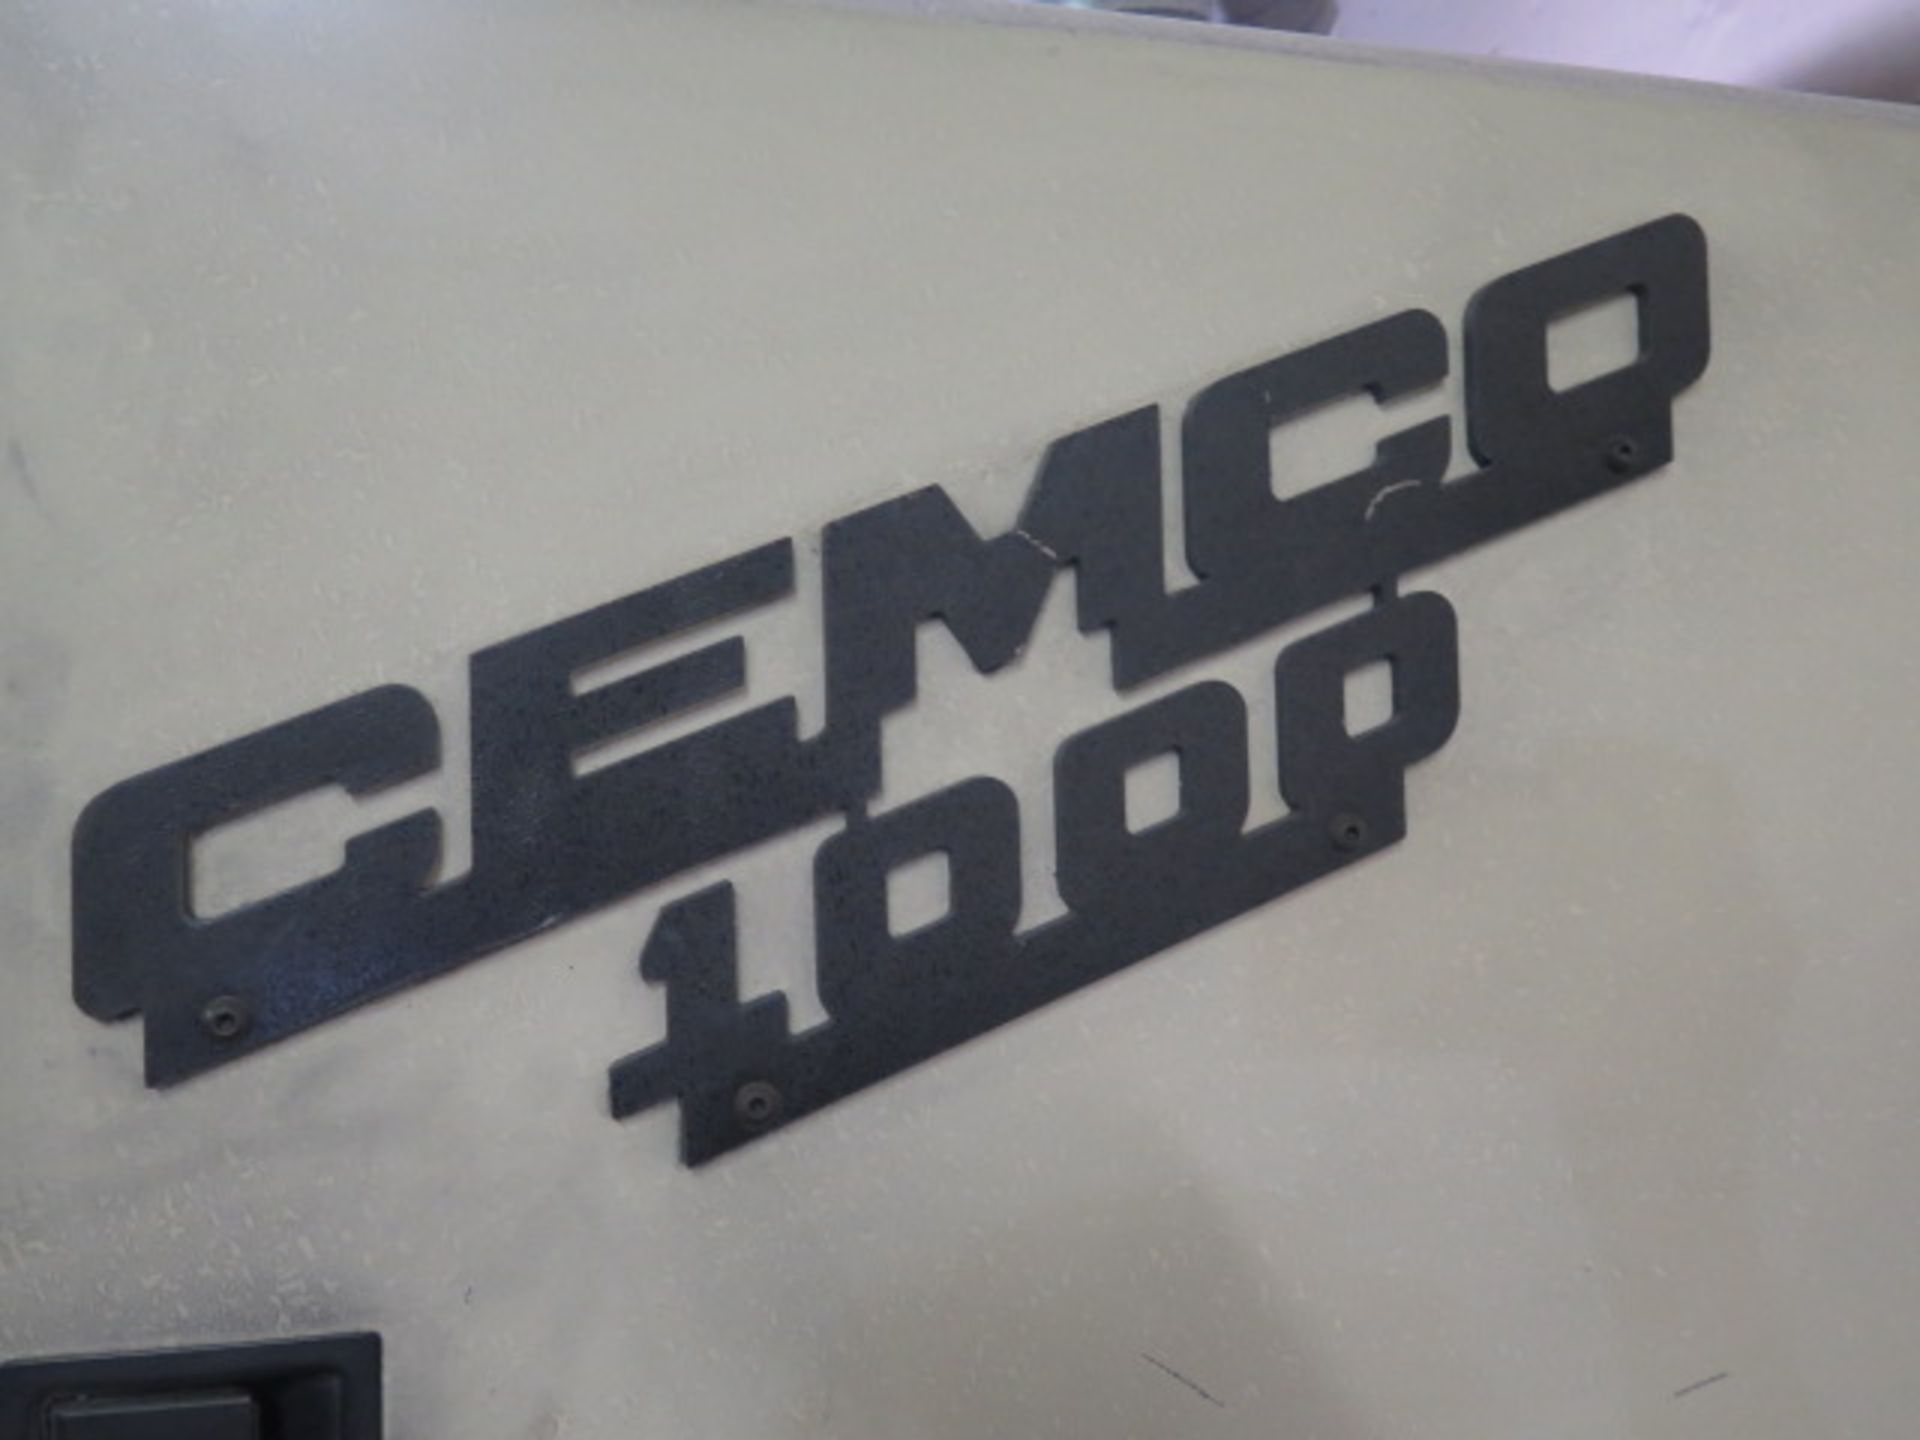 Cemco 1000 mdl. UR-1137SEMD 36" Belt Grainer s/n JR-1177-1 w/ Rand Bright dust collector, SOLD AS IS - Image 9 of 18